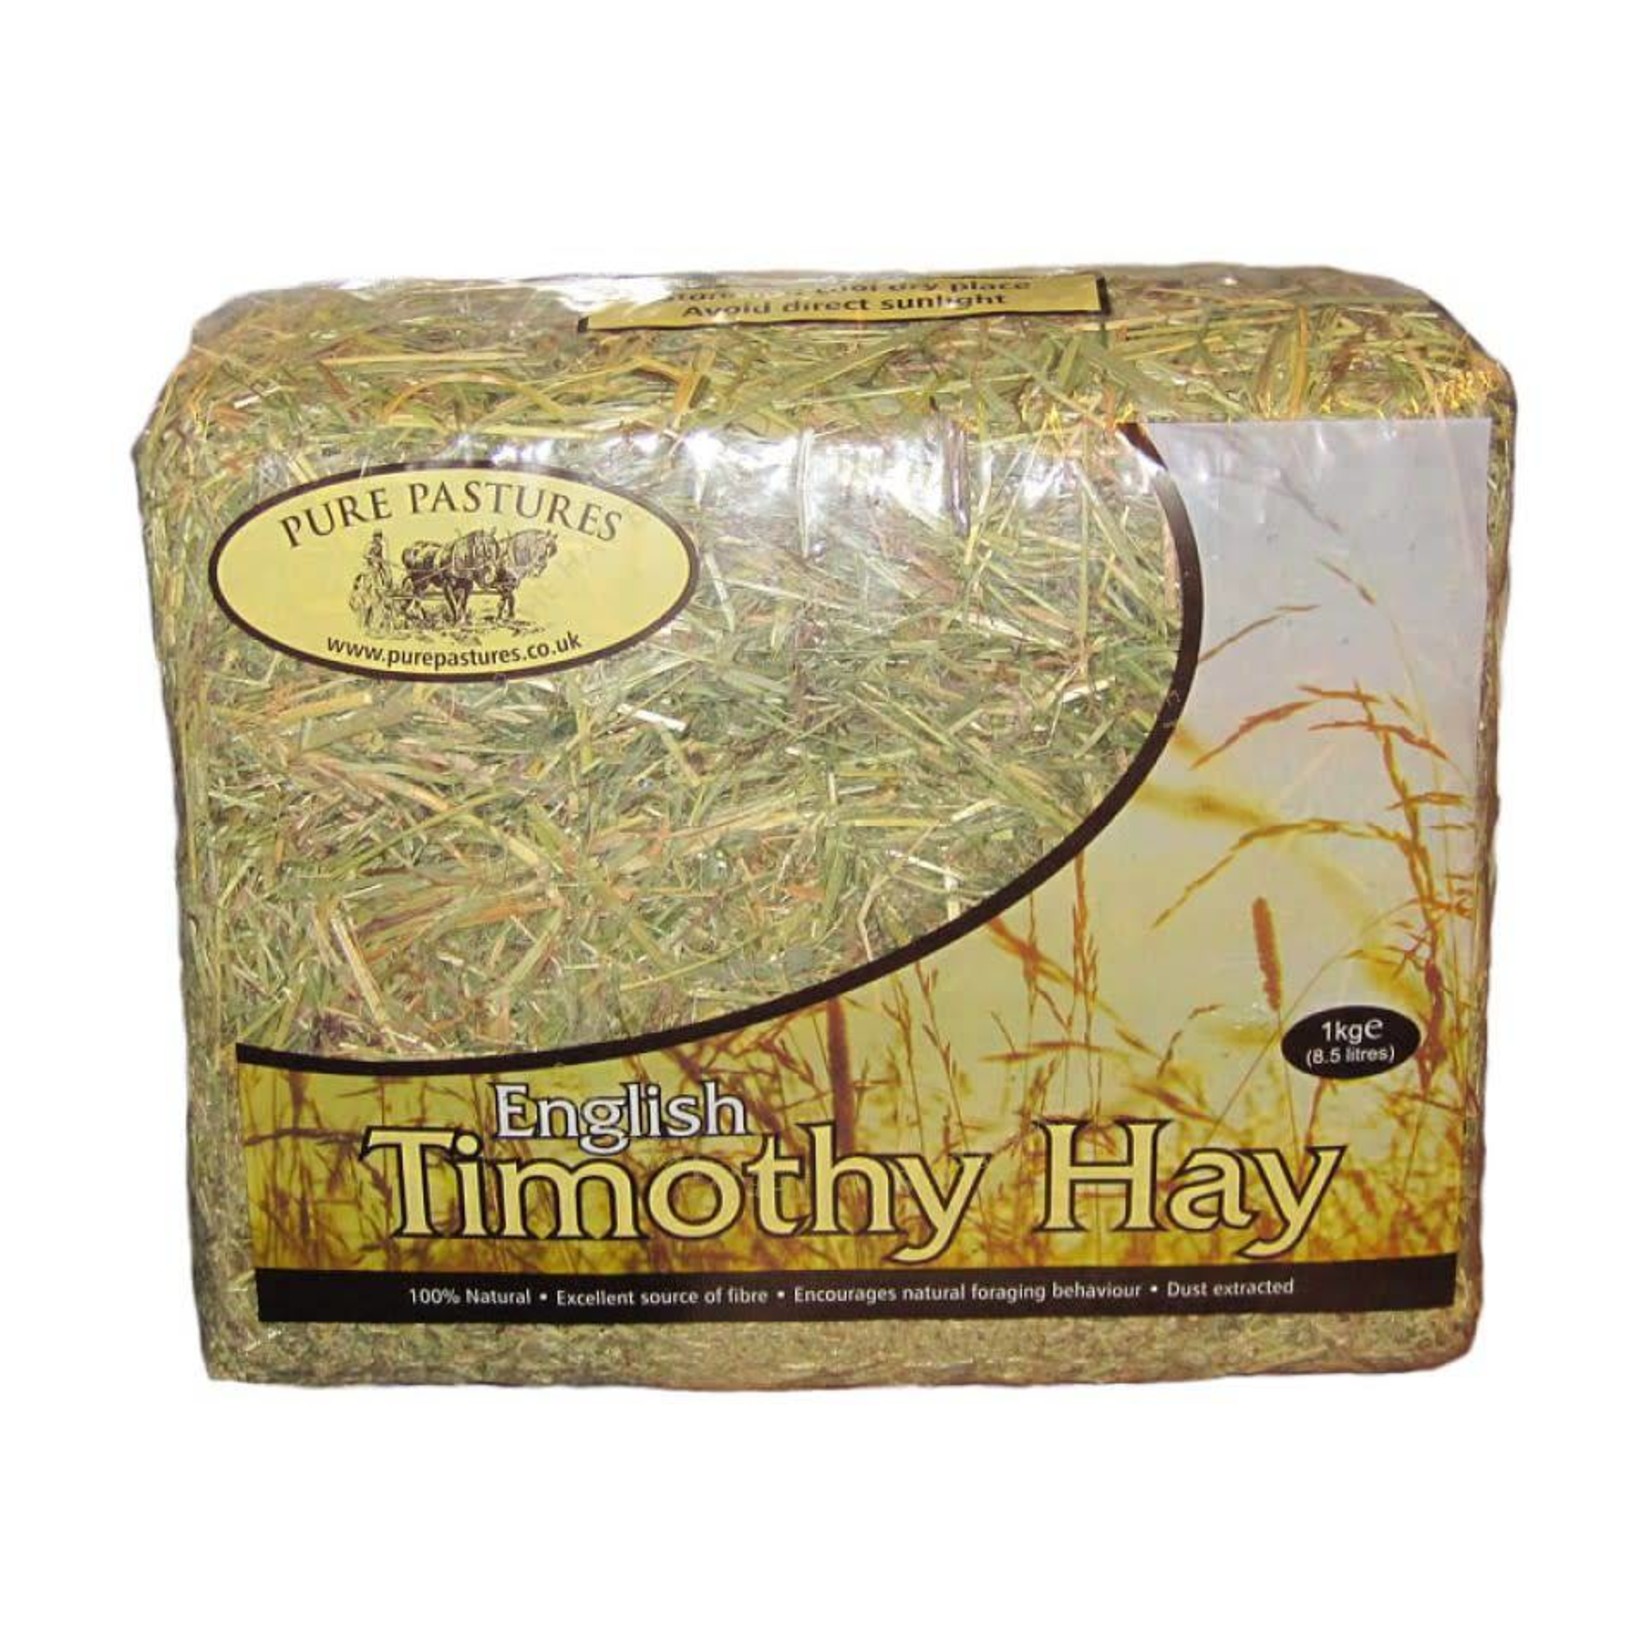 Pure Pastures English Timothy Hay, 1kg